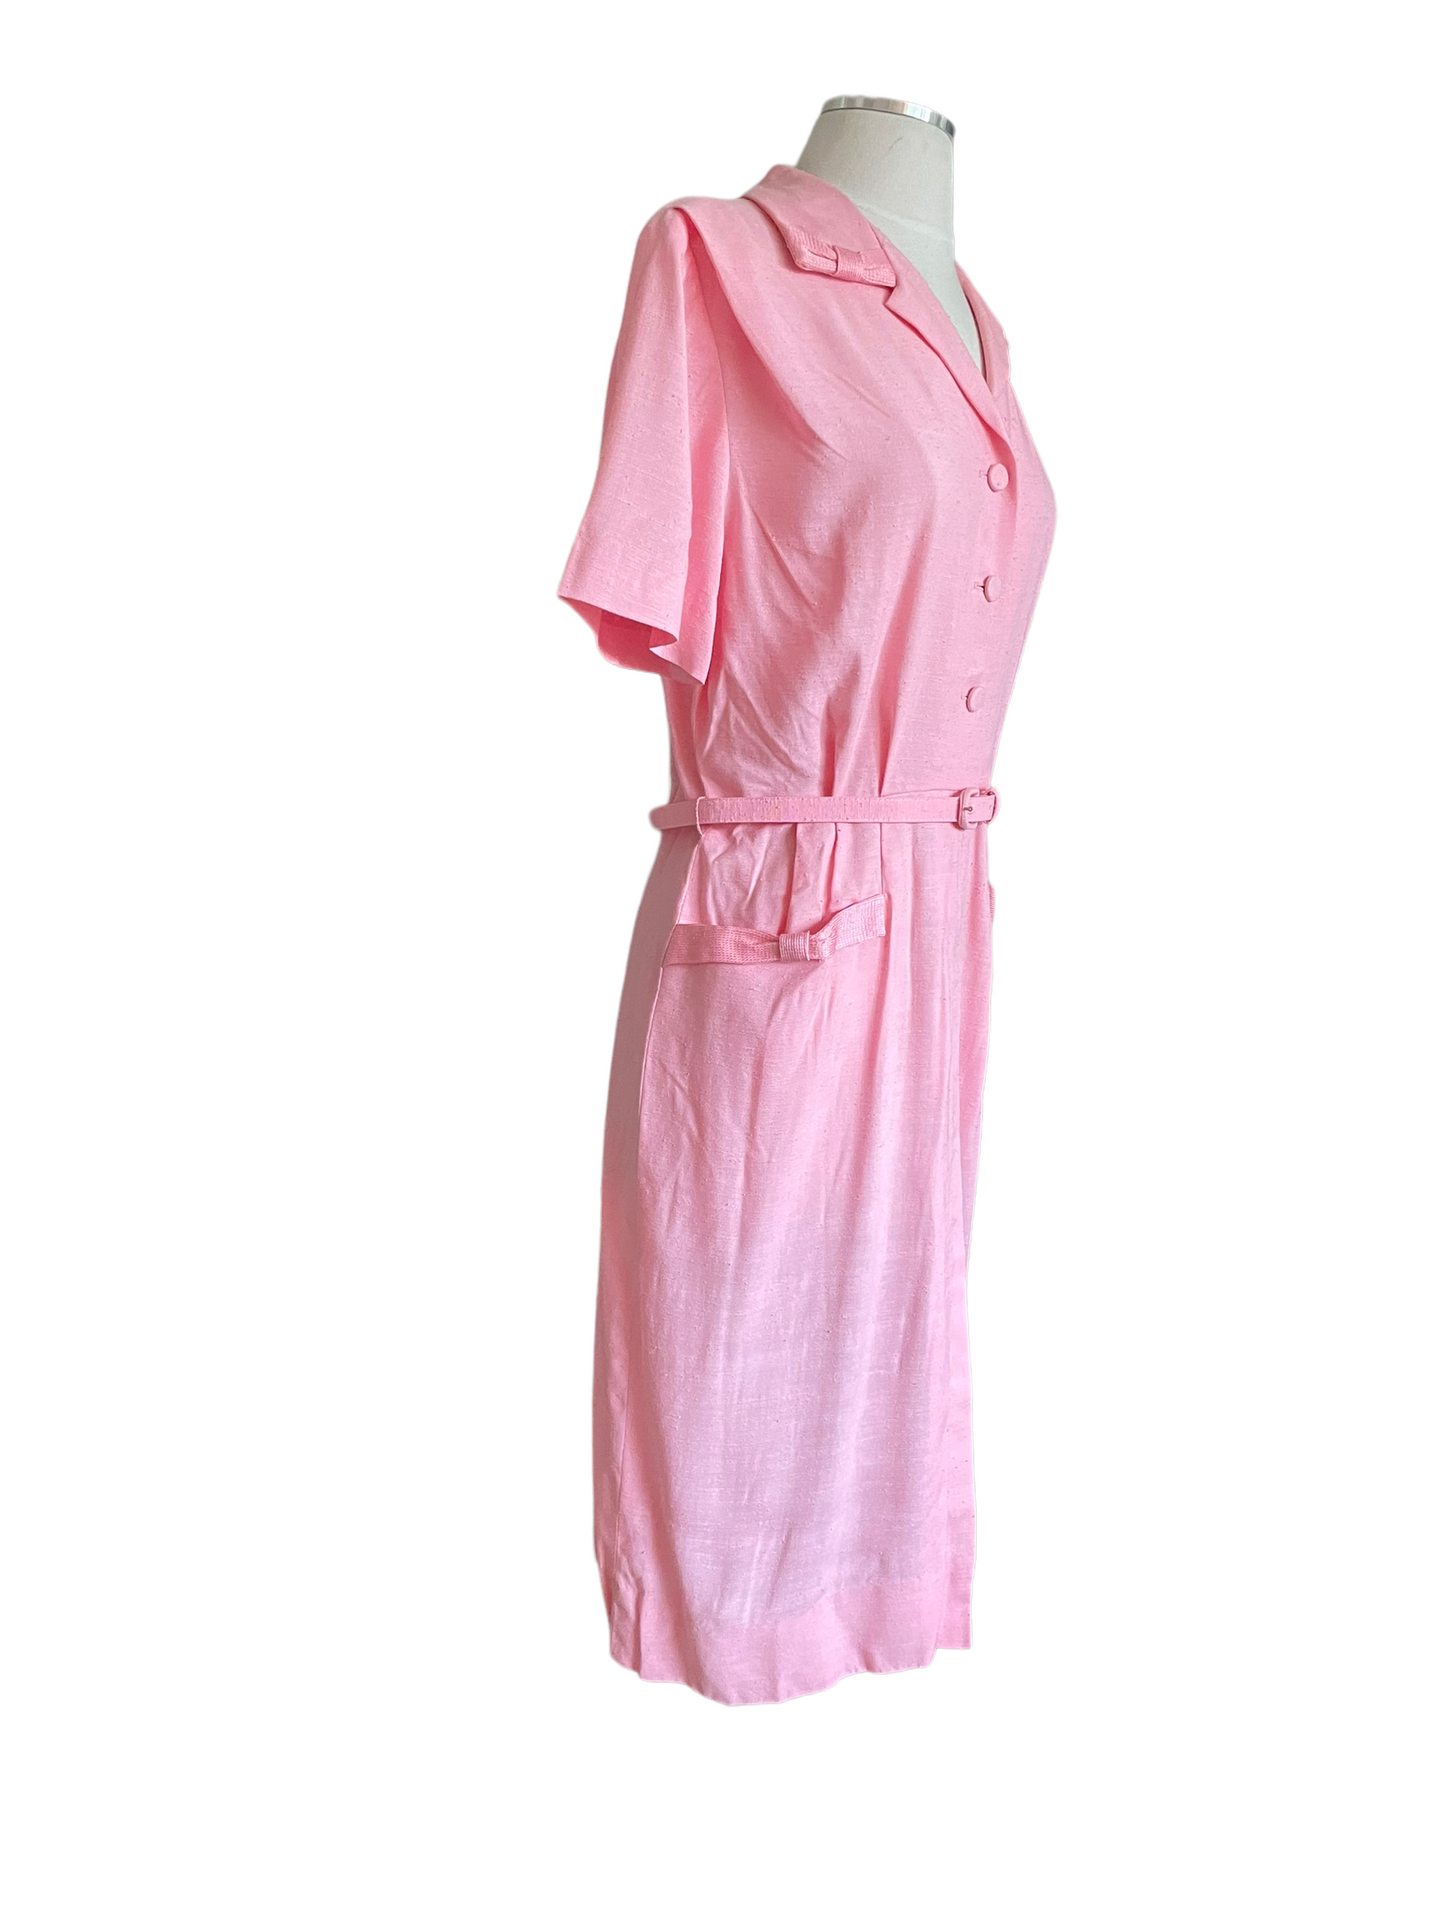 Vintage 1950s Deadstock Lordleigh Light Pink Silk and Rayon Dress SZ M |  Barn Owl Vintage | Seattle Vintage Dresses Full right side view.